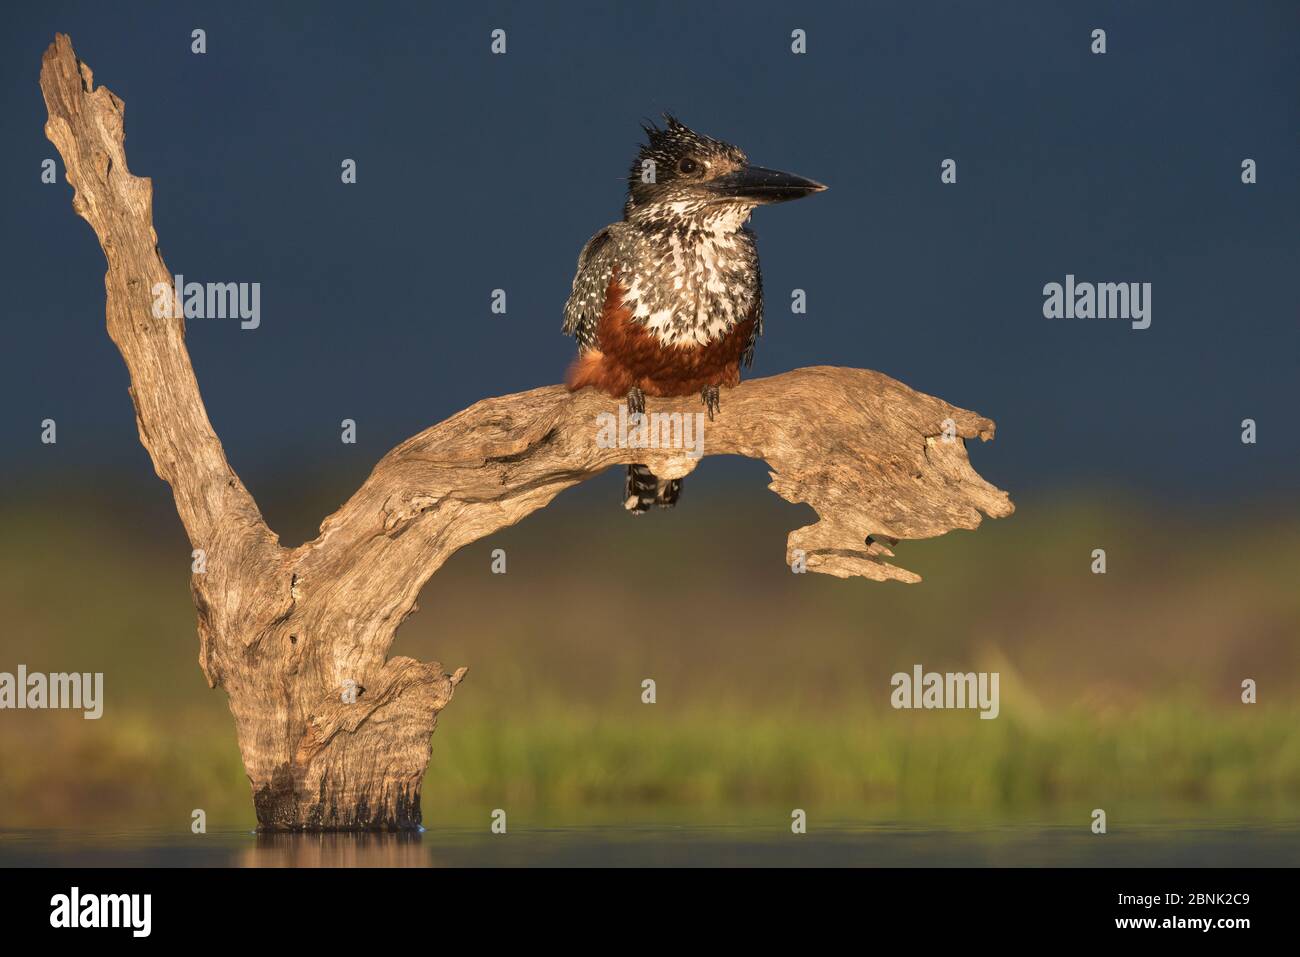 Giant kingfisher (Megaceryle maxima) sitting on a log above the water, watching for fish, Zimanga Private Game Reserve, South Africa. Stock Photo